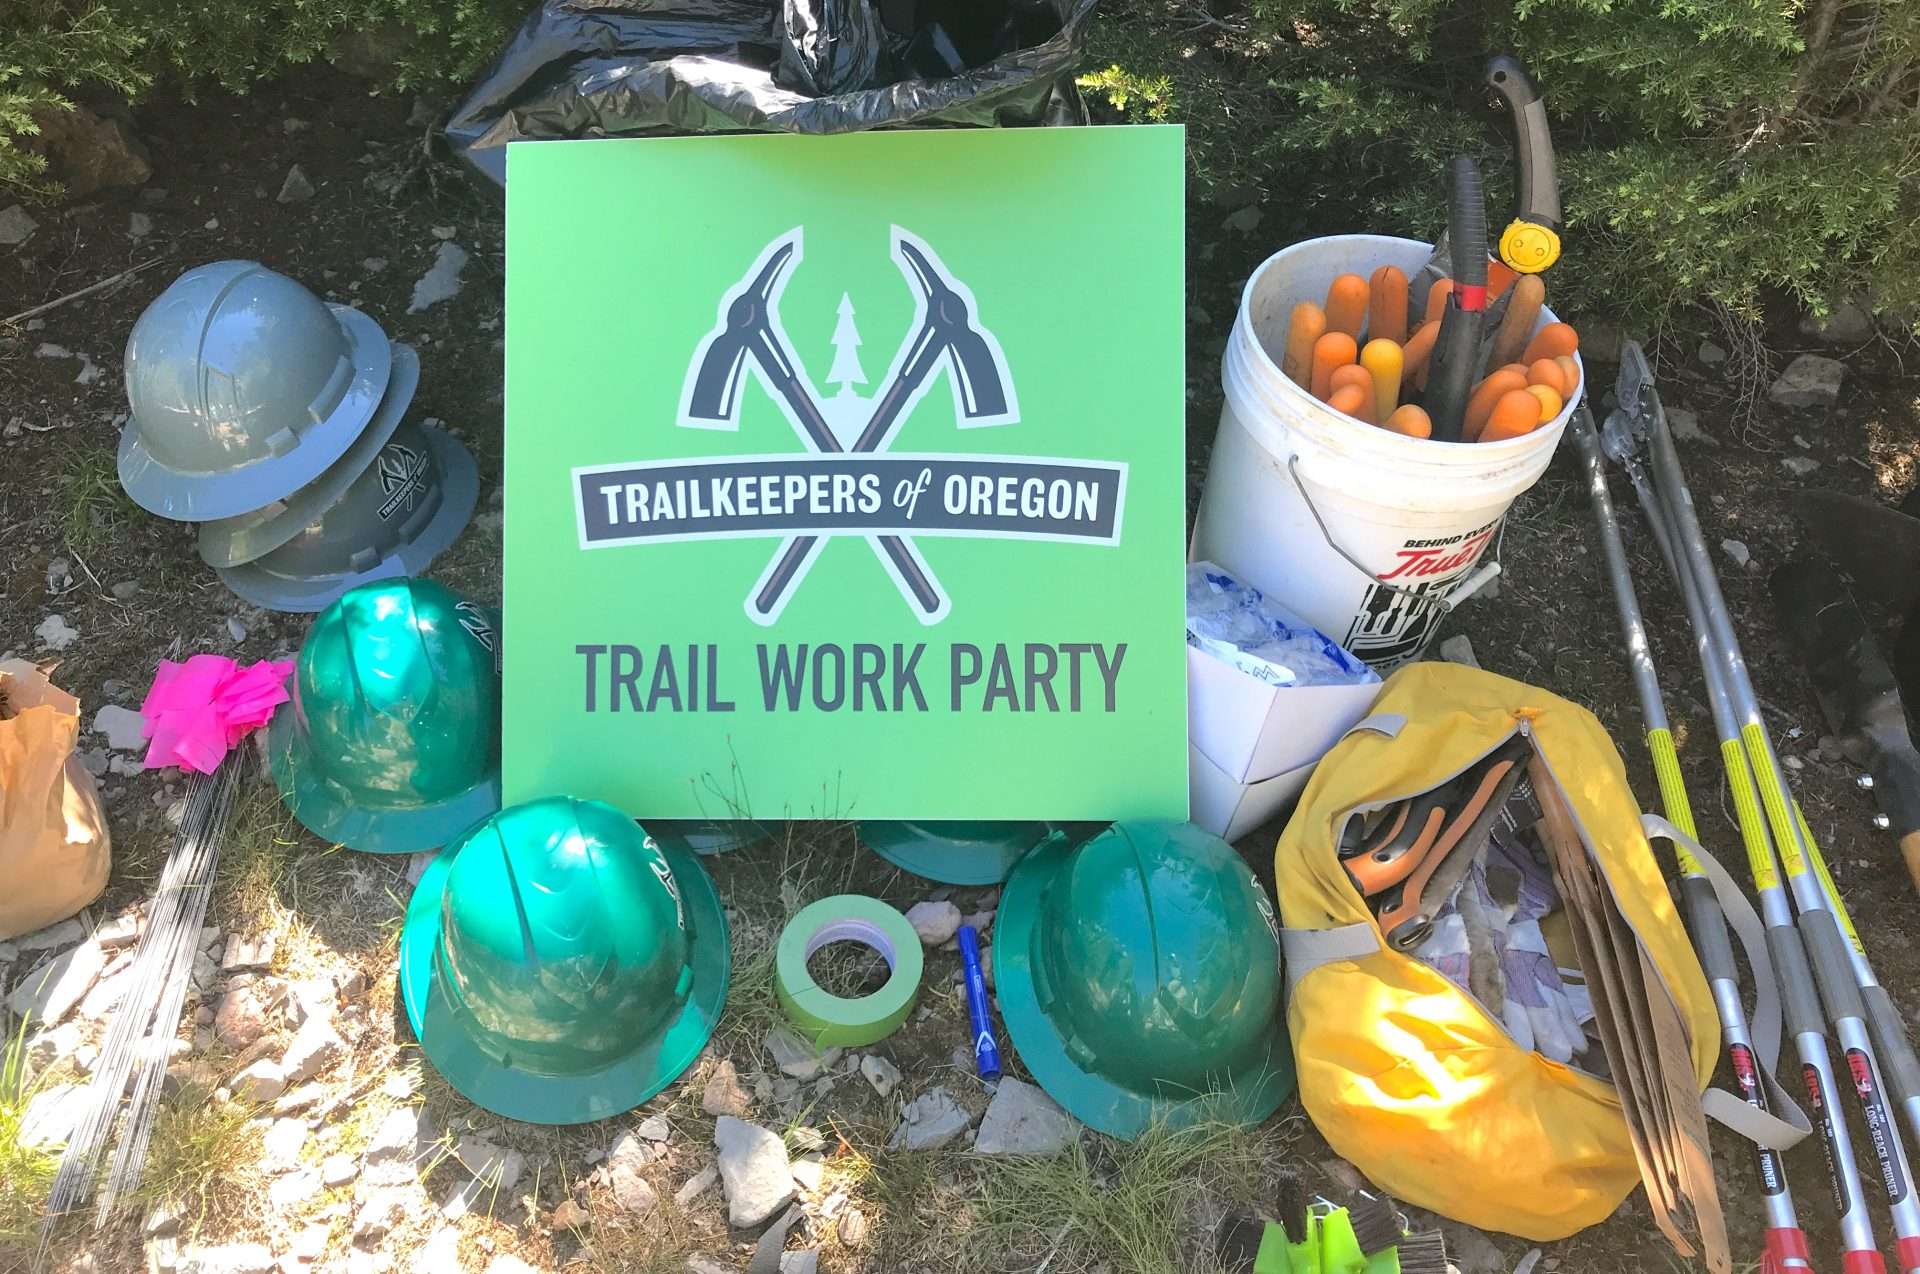 A TKO "Trail Work Party" sign surrounded by hardhats, gloves, loppers, and other trail tools.